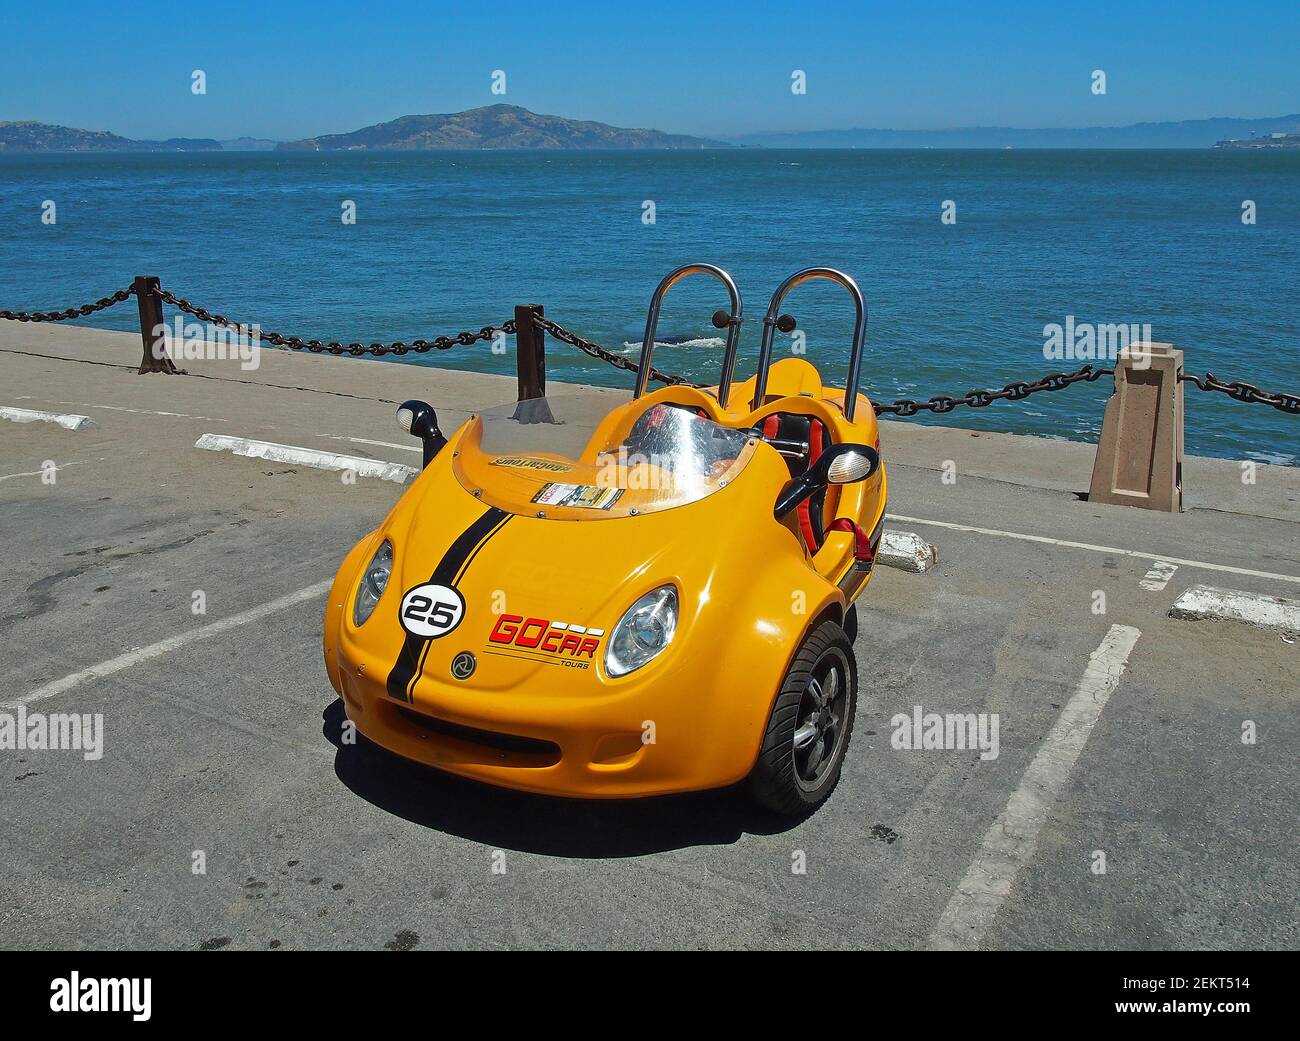 3 wheel, 2 person GoCar rental vehicle parked along the Bay at Fort Point lot in San Francisco, California Stock Photo